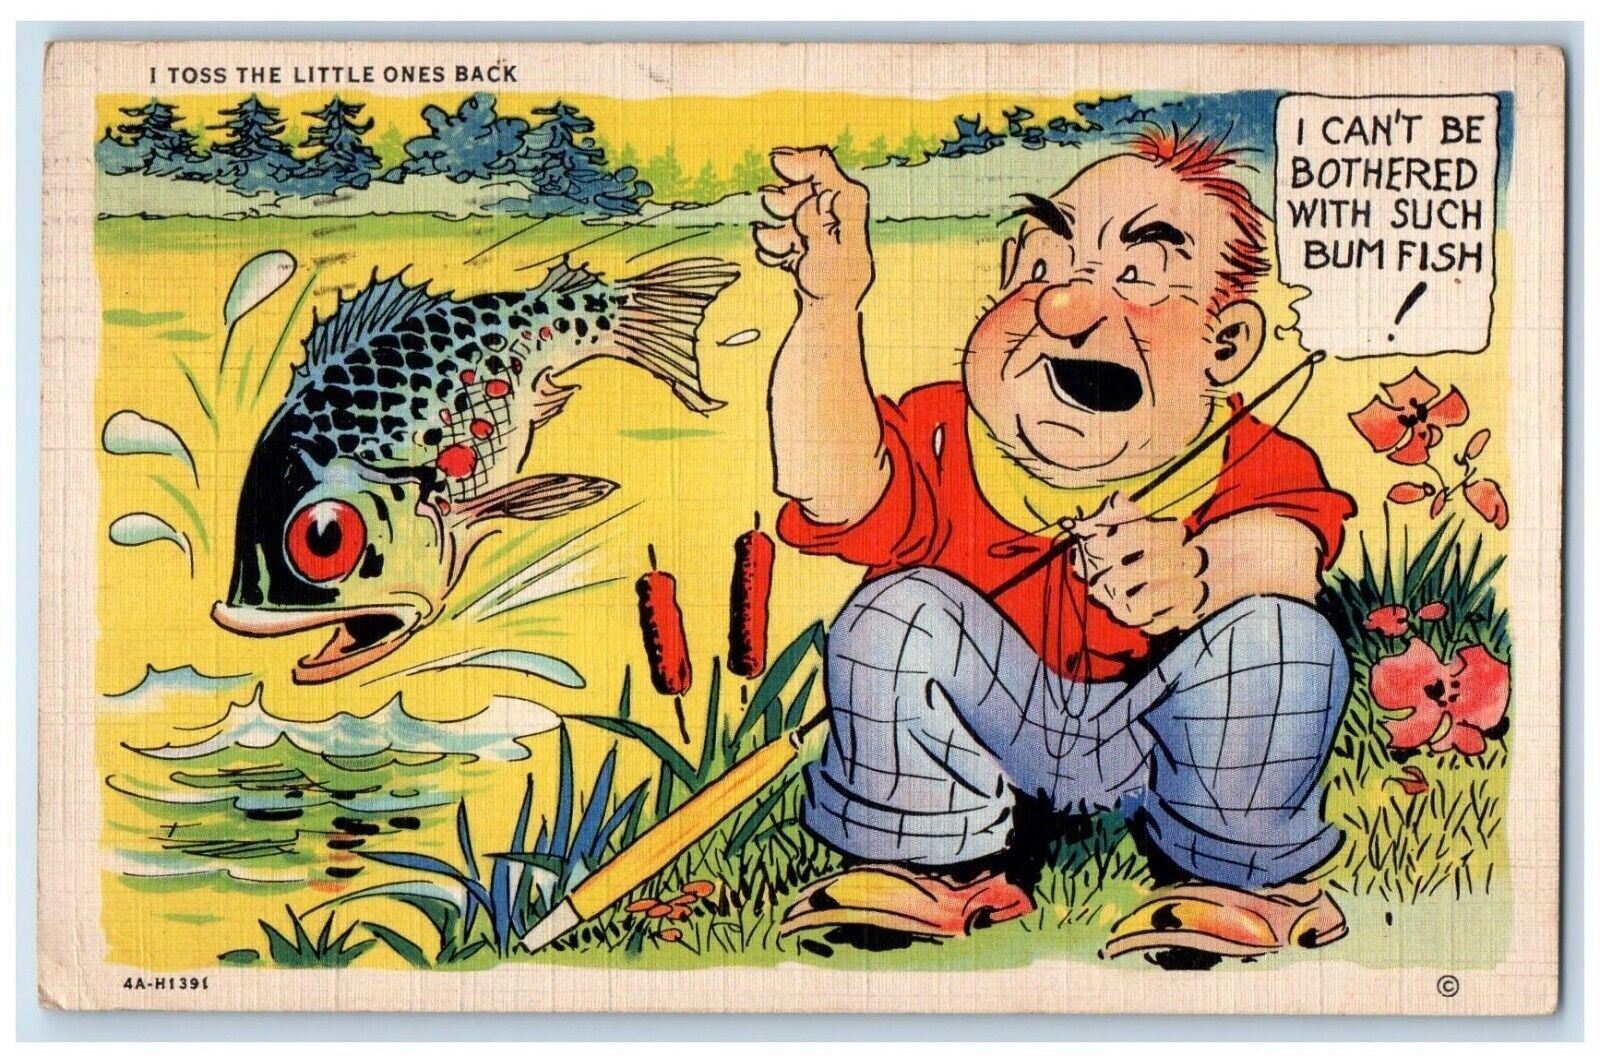 1936 Old Man Catched Big Fish, I Toss The Little Ones Back Comic Postcard